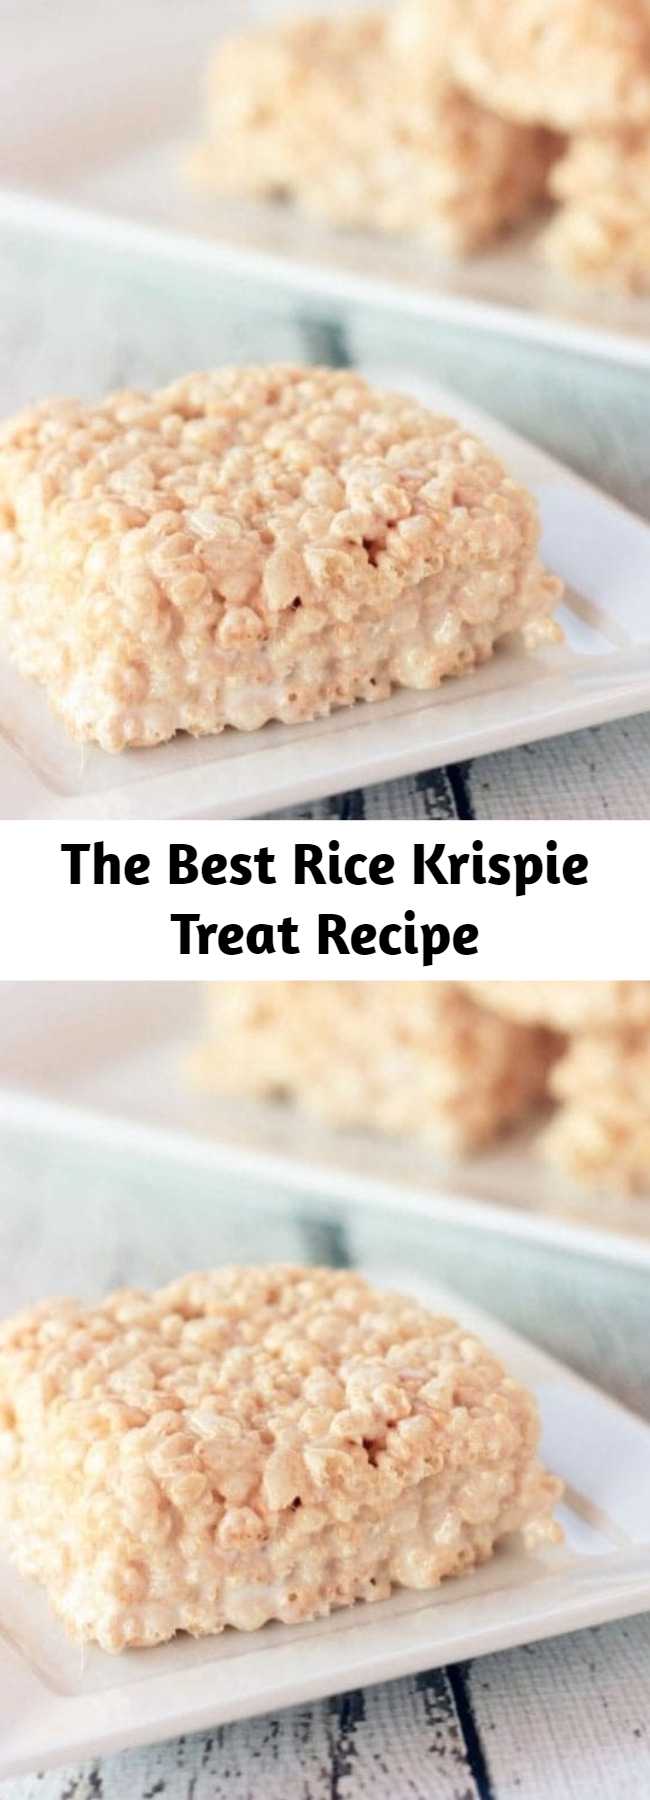 The Best Rice Krispie Treat Recipe - Hands down THE BEST Rice Krispie Treats EVER! These treats are not your back-of-the-box, plain ole’ treats. These ooey gooey treats are perfection that you can’t resist!